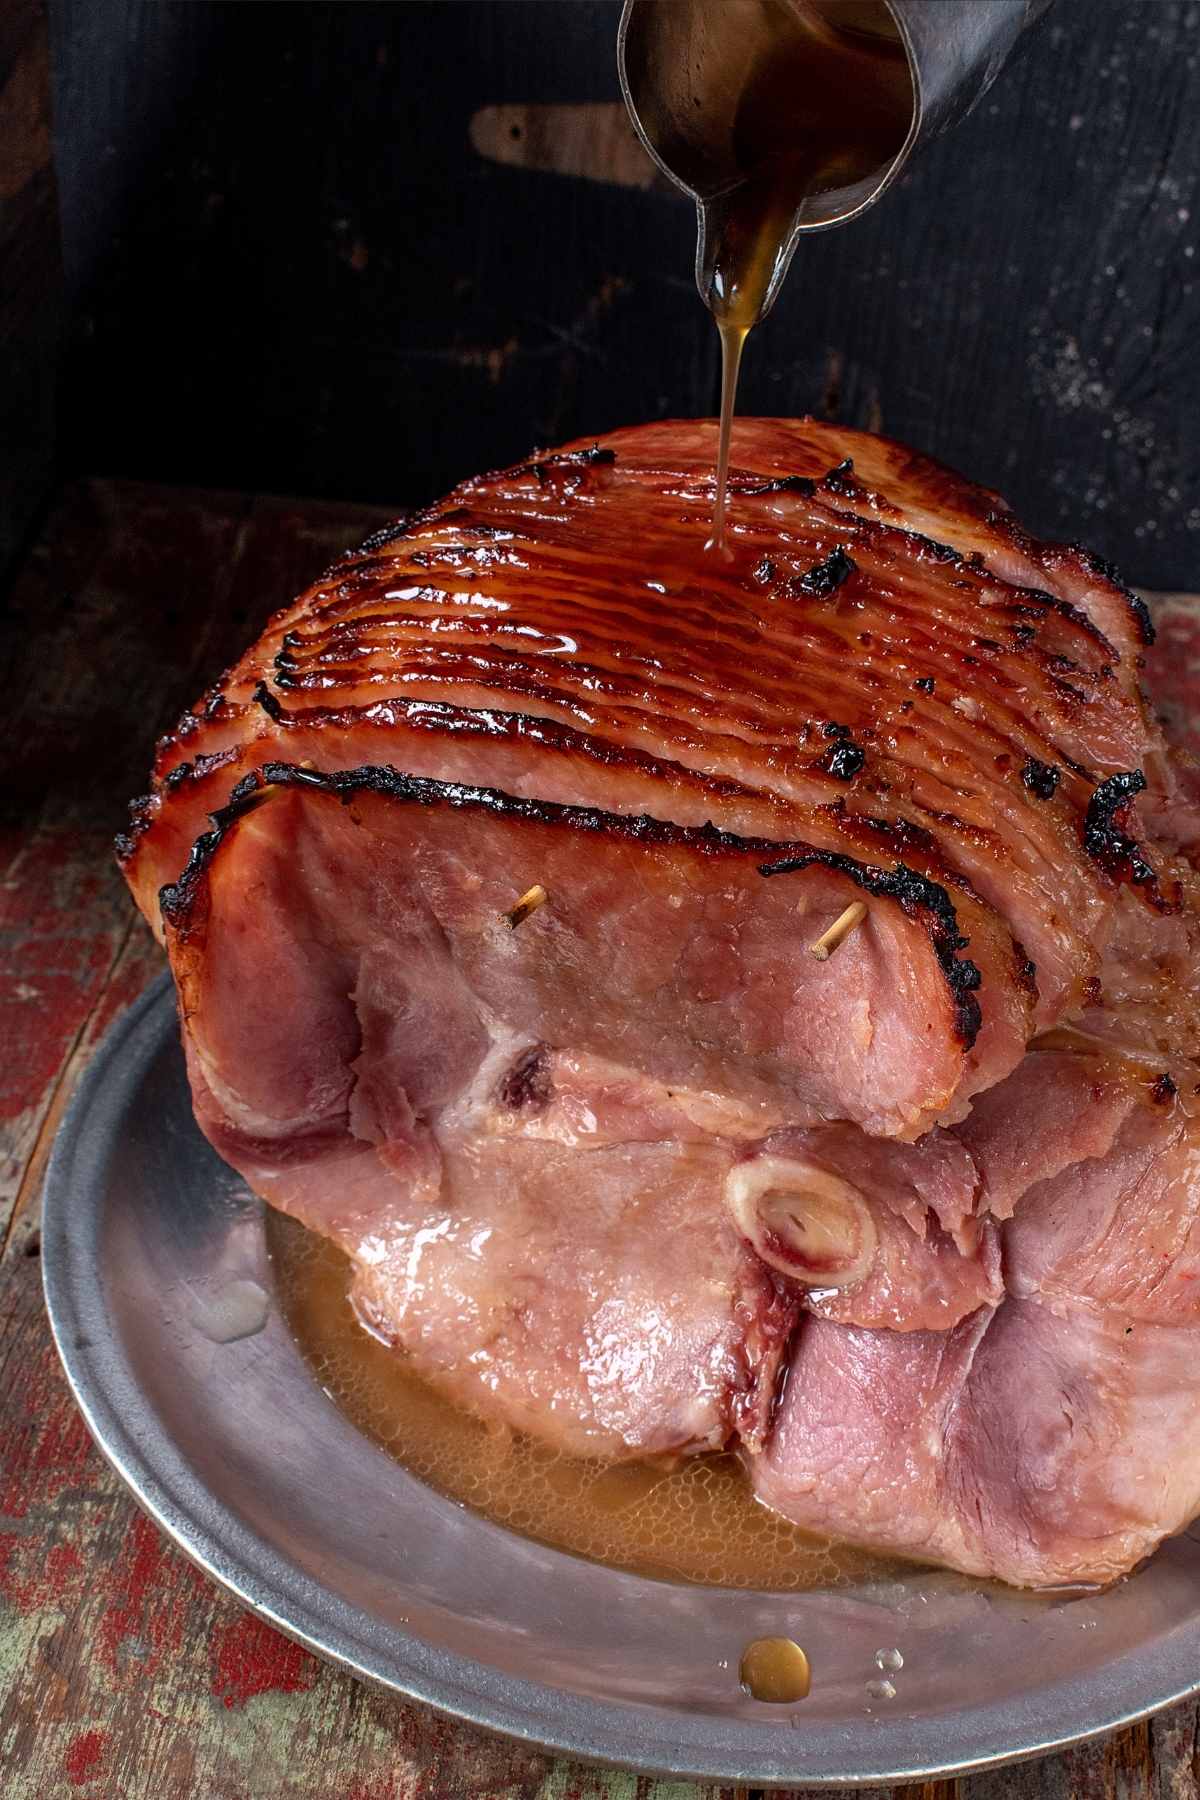 If you’re preparing ham for a feast, you’ll want to ensure that it’s moist and tender. In this article, we’re sharing some tips on how to prepare a ham as well as a guideline for the appropriate internal temperature.